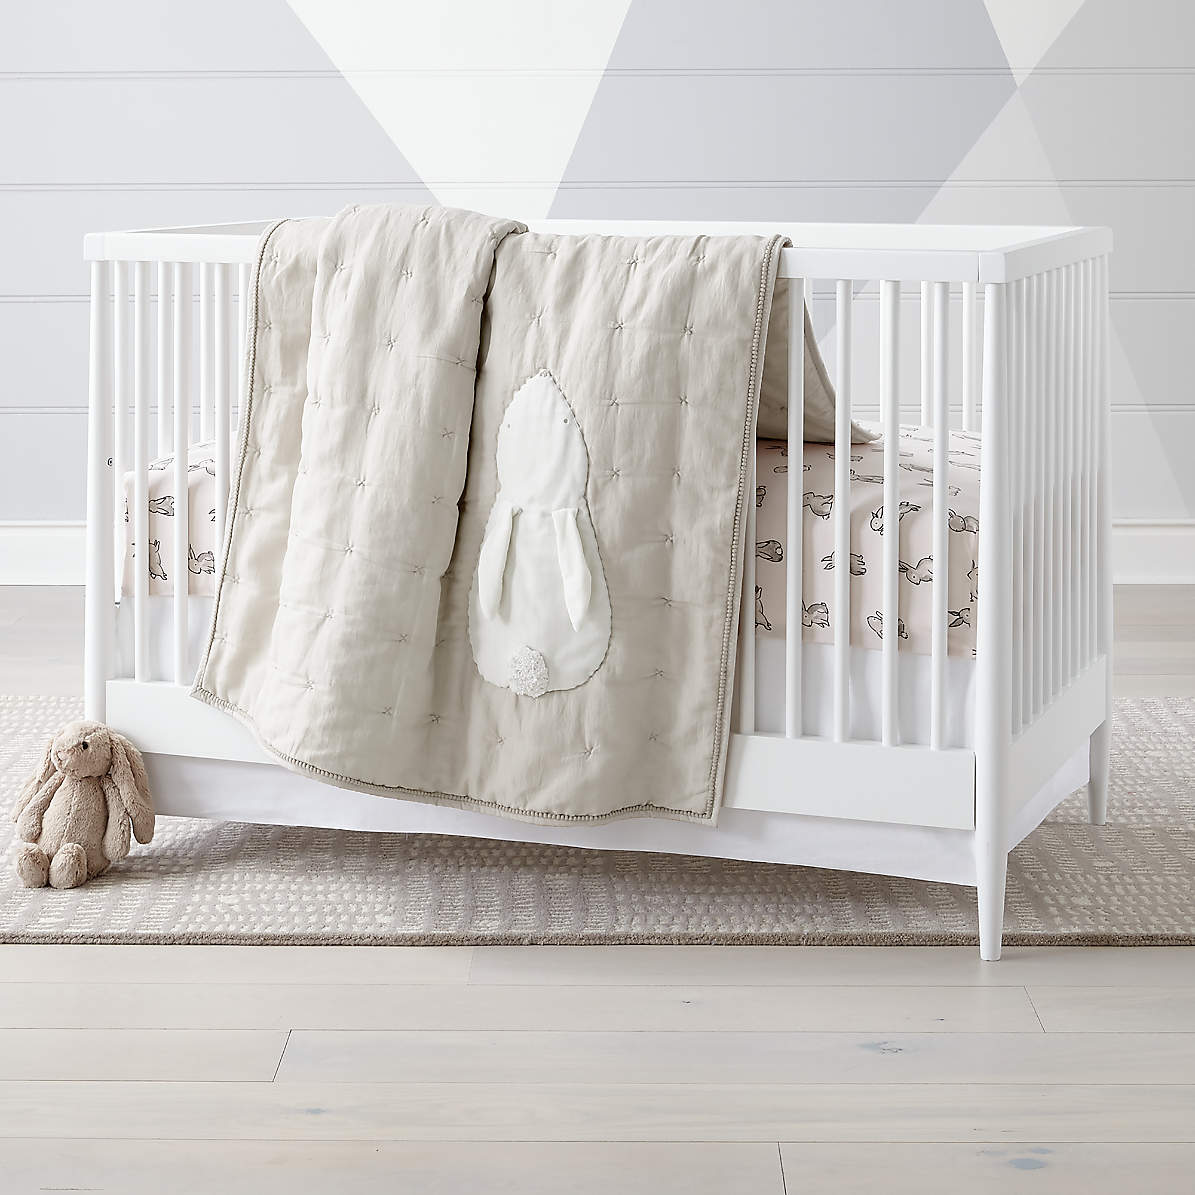 Hoppy Tails Bunny Crib Bedding Crate And Barrel